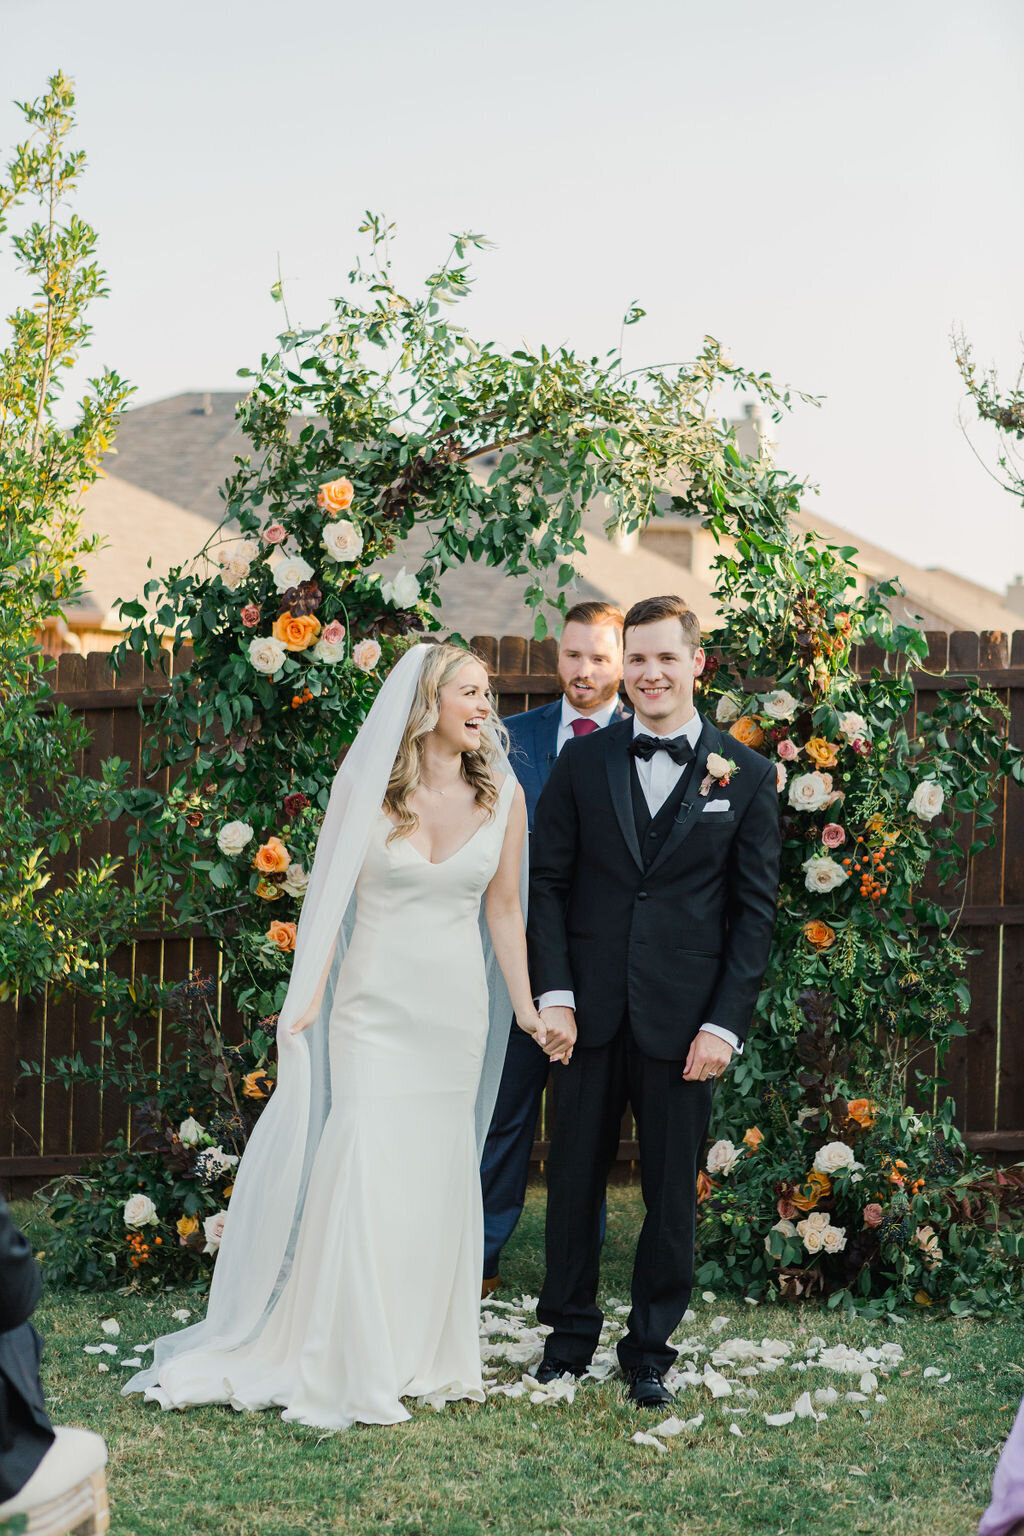 Wedding ceremony with floral arch by Vella Nest Florals